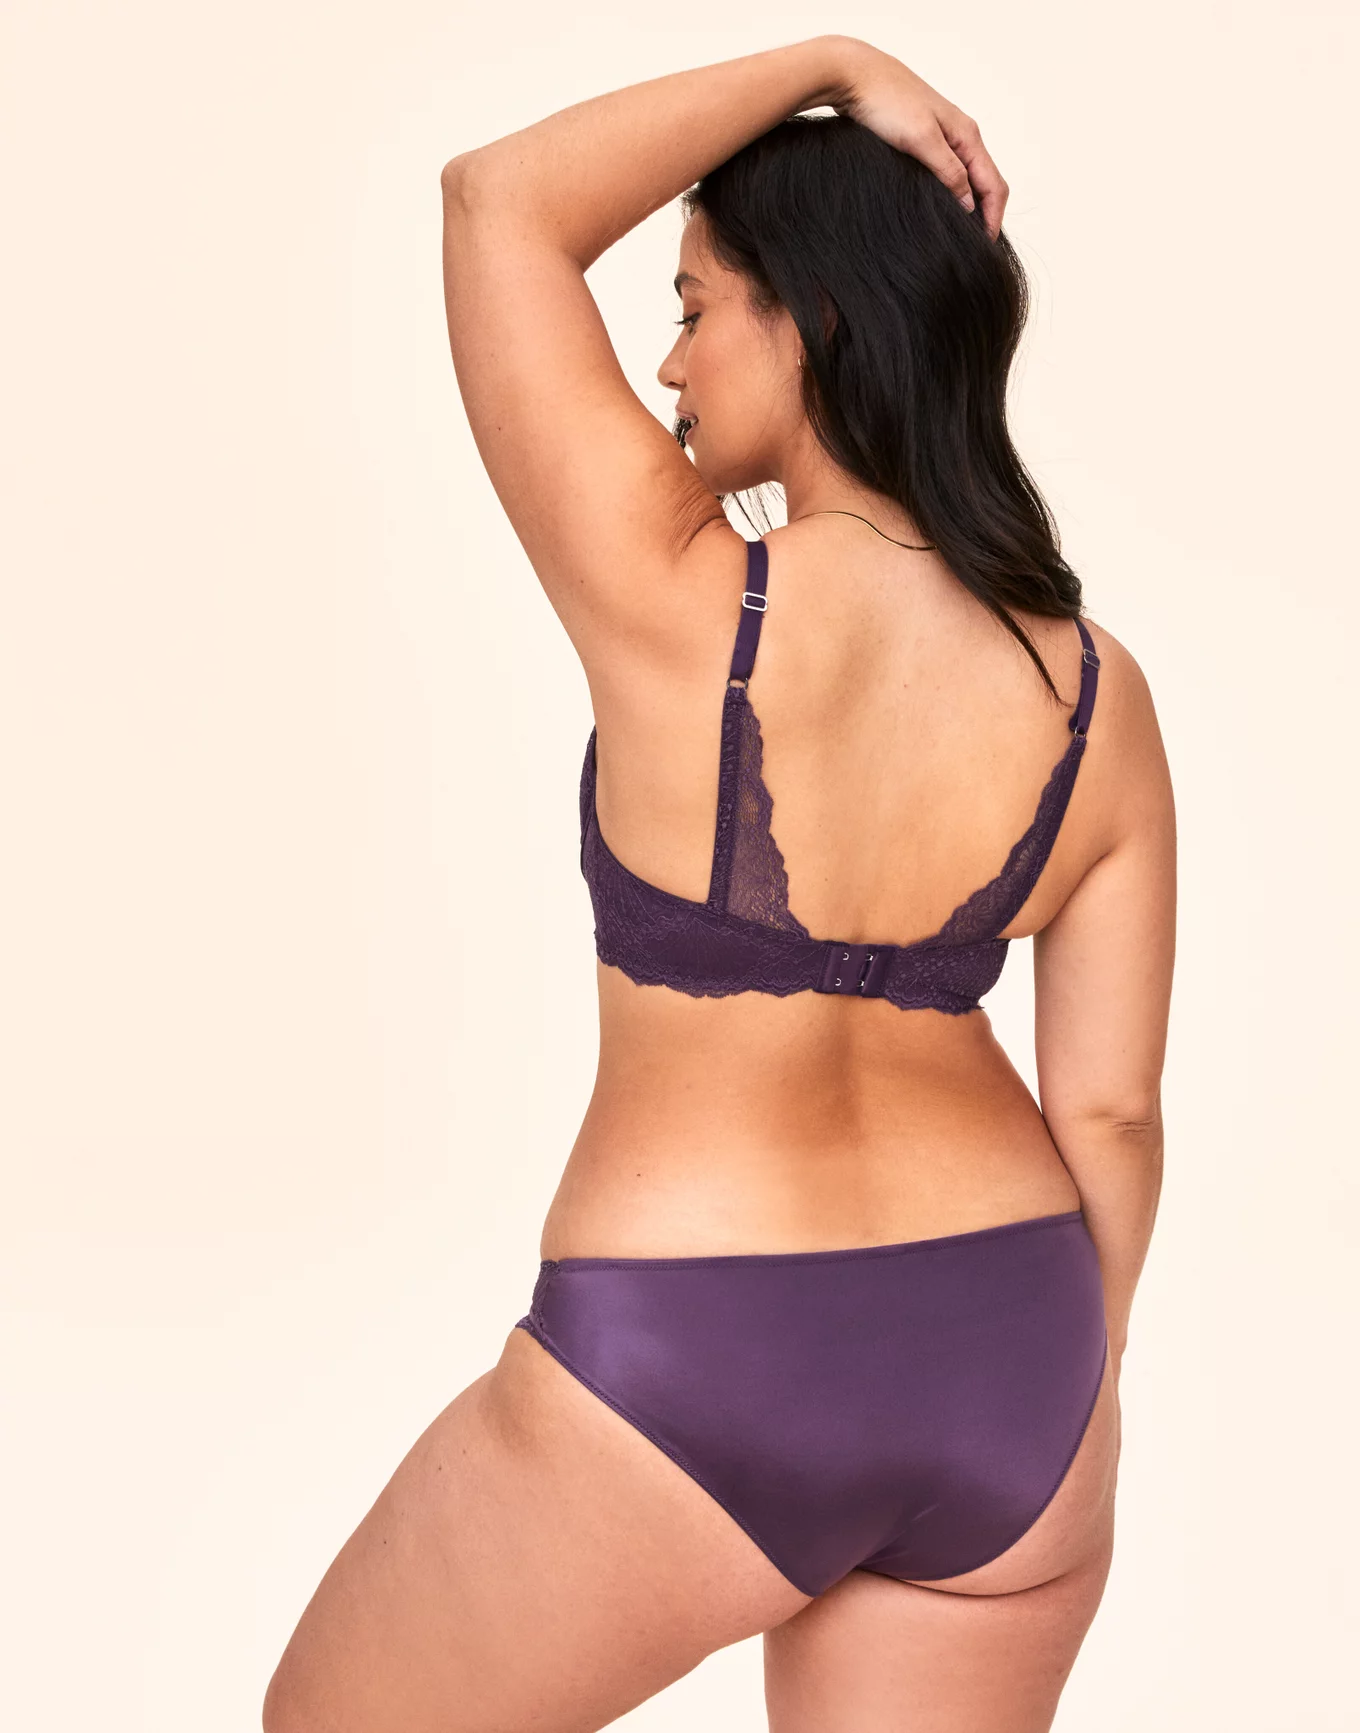 Adore Me purple boned strappy chocker bejeweled lace and mesh bra